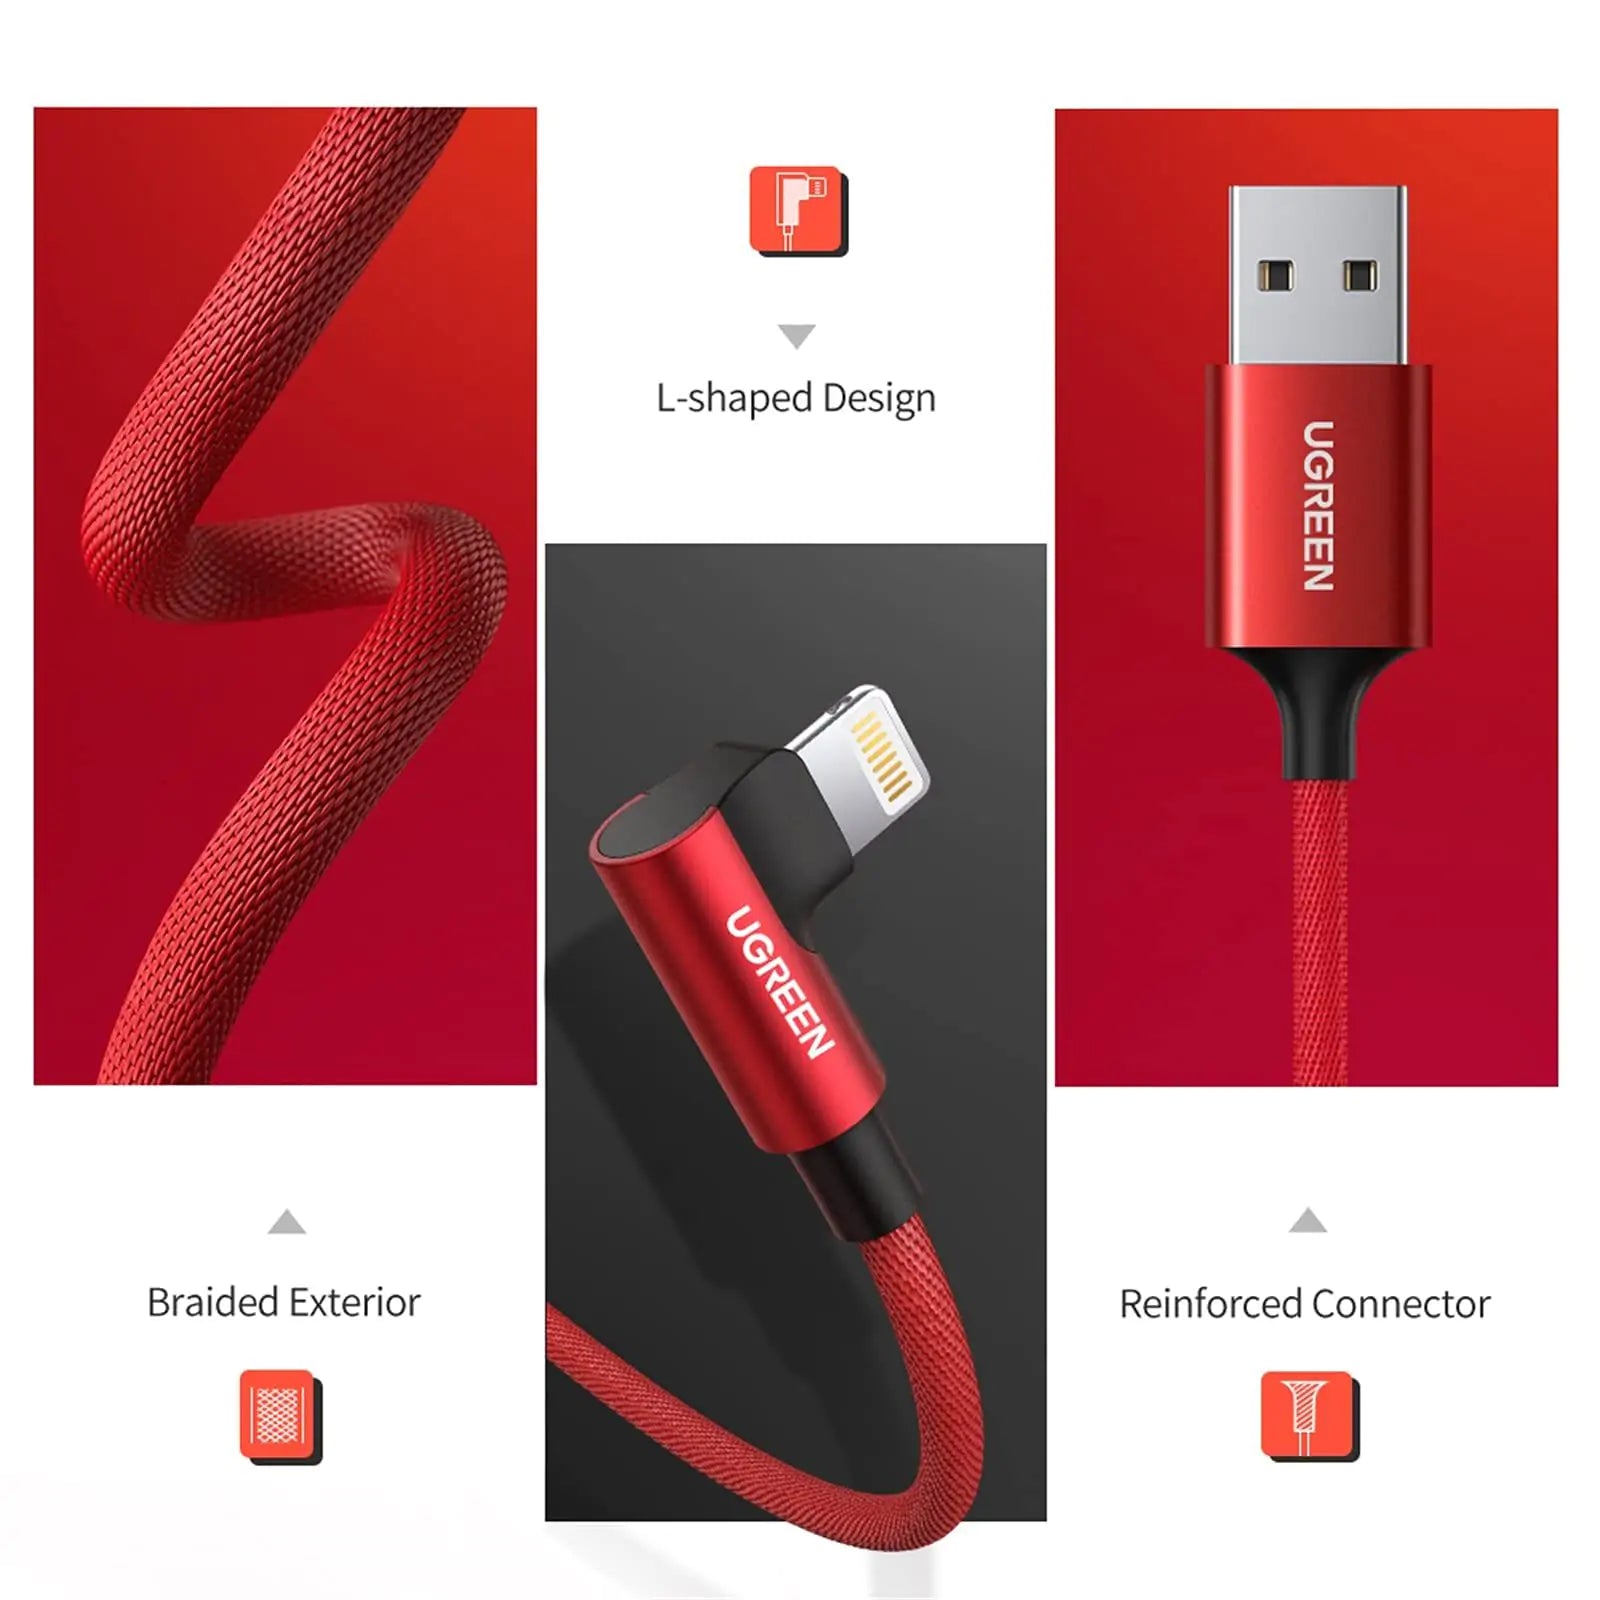 UGREEN USB A to Lightning Braided Cable with Aluminum Shell M/M, Nickel Plated Connector, red, 1m aleemaz.com